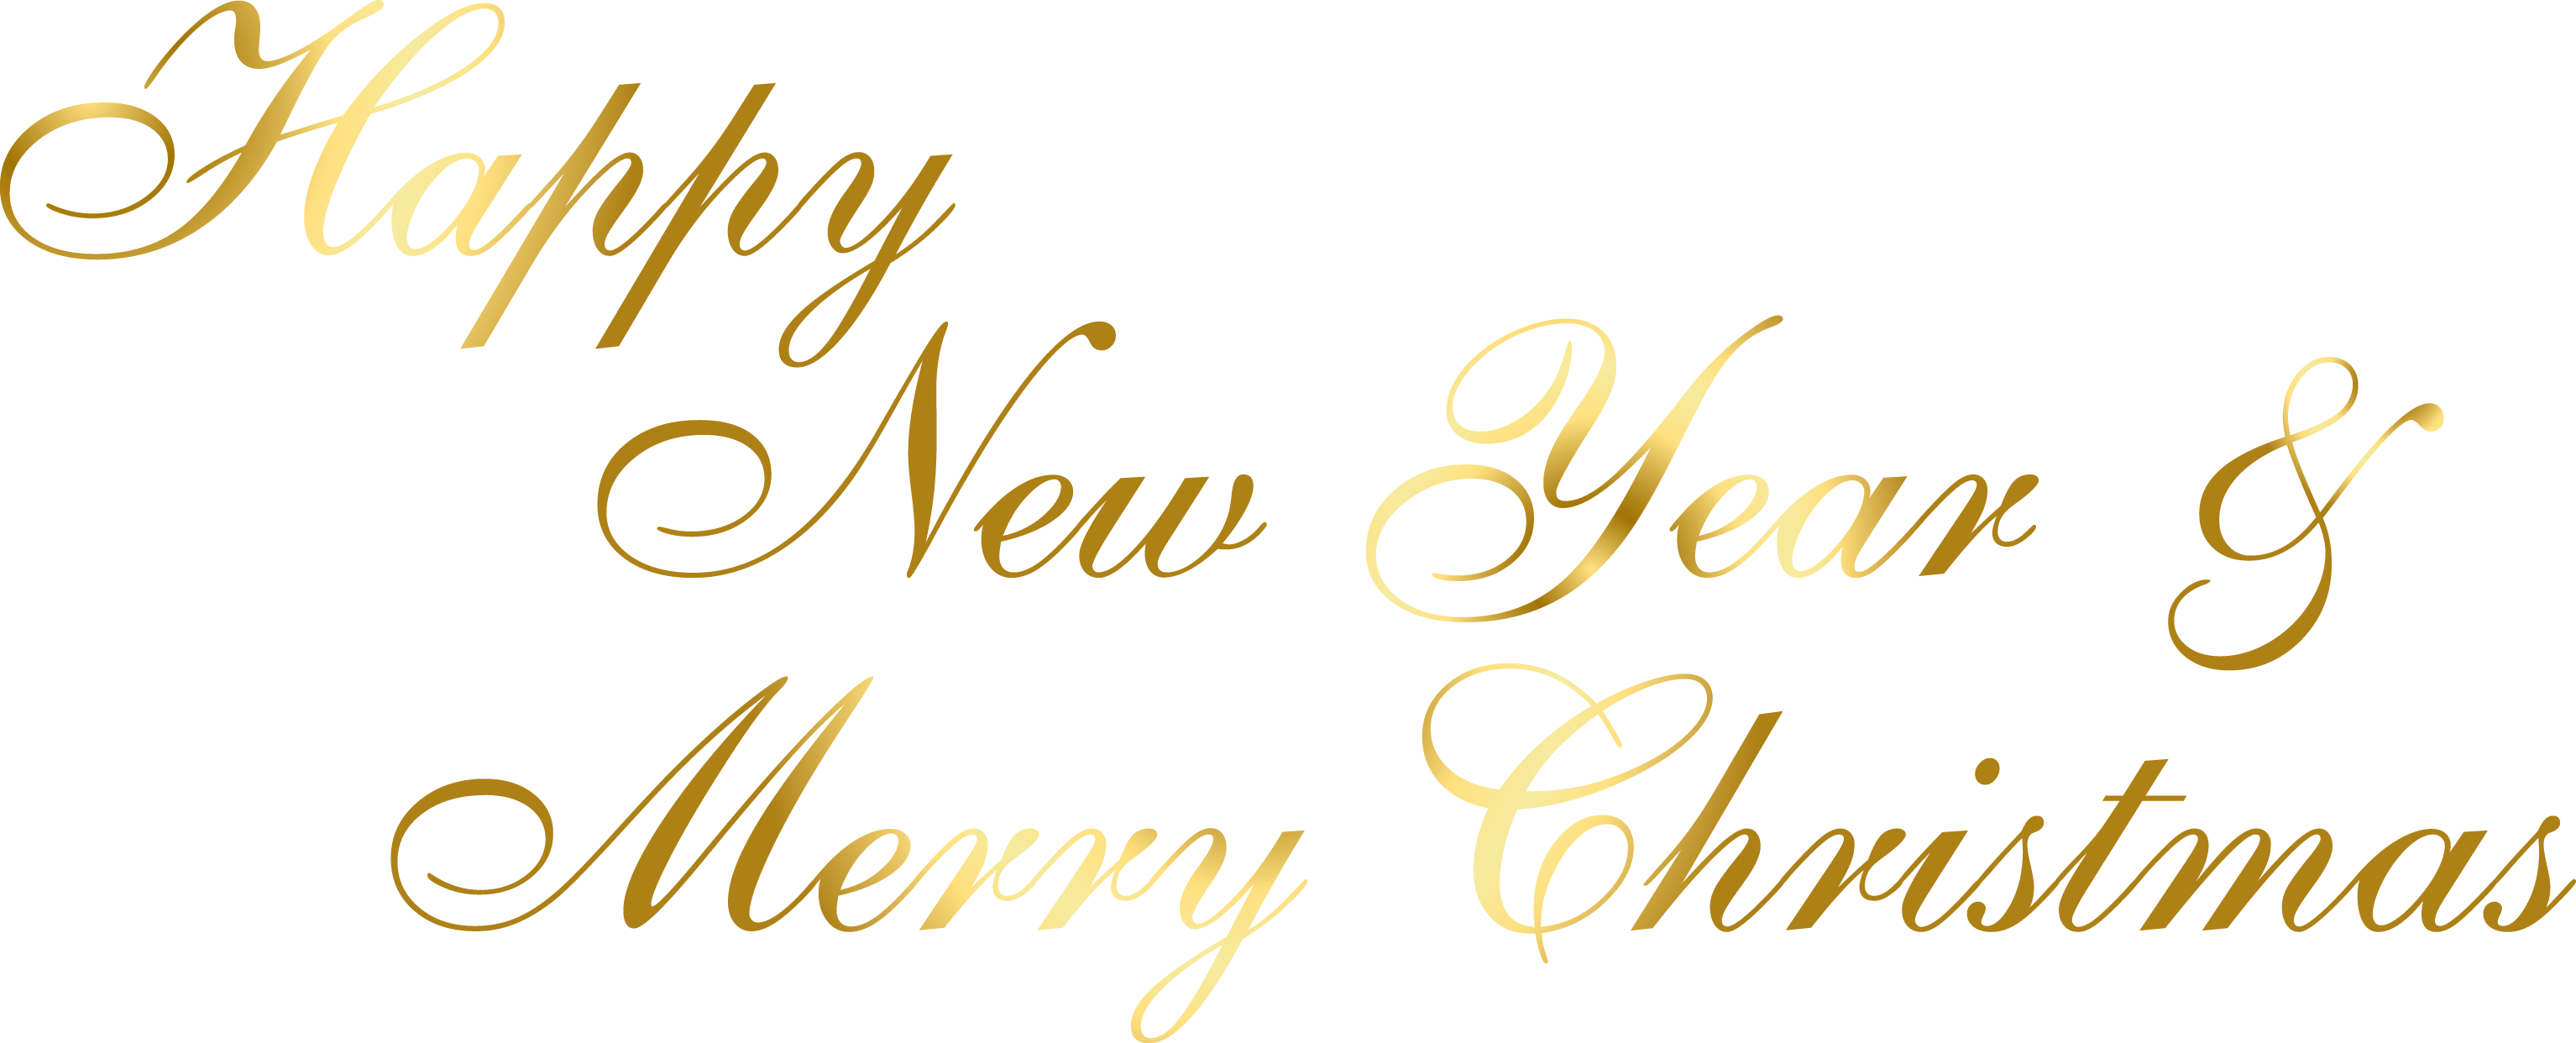 Happy New Year and Merry Christmas